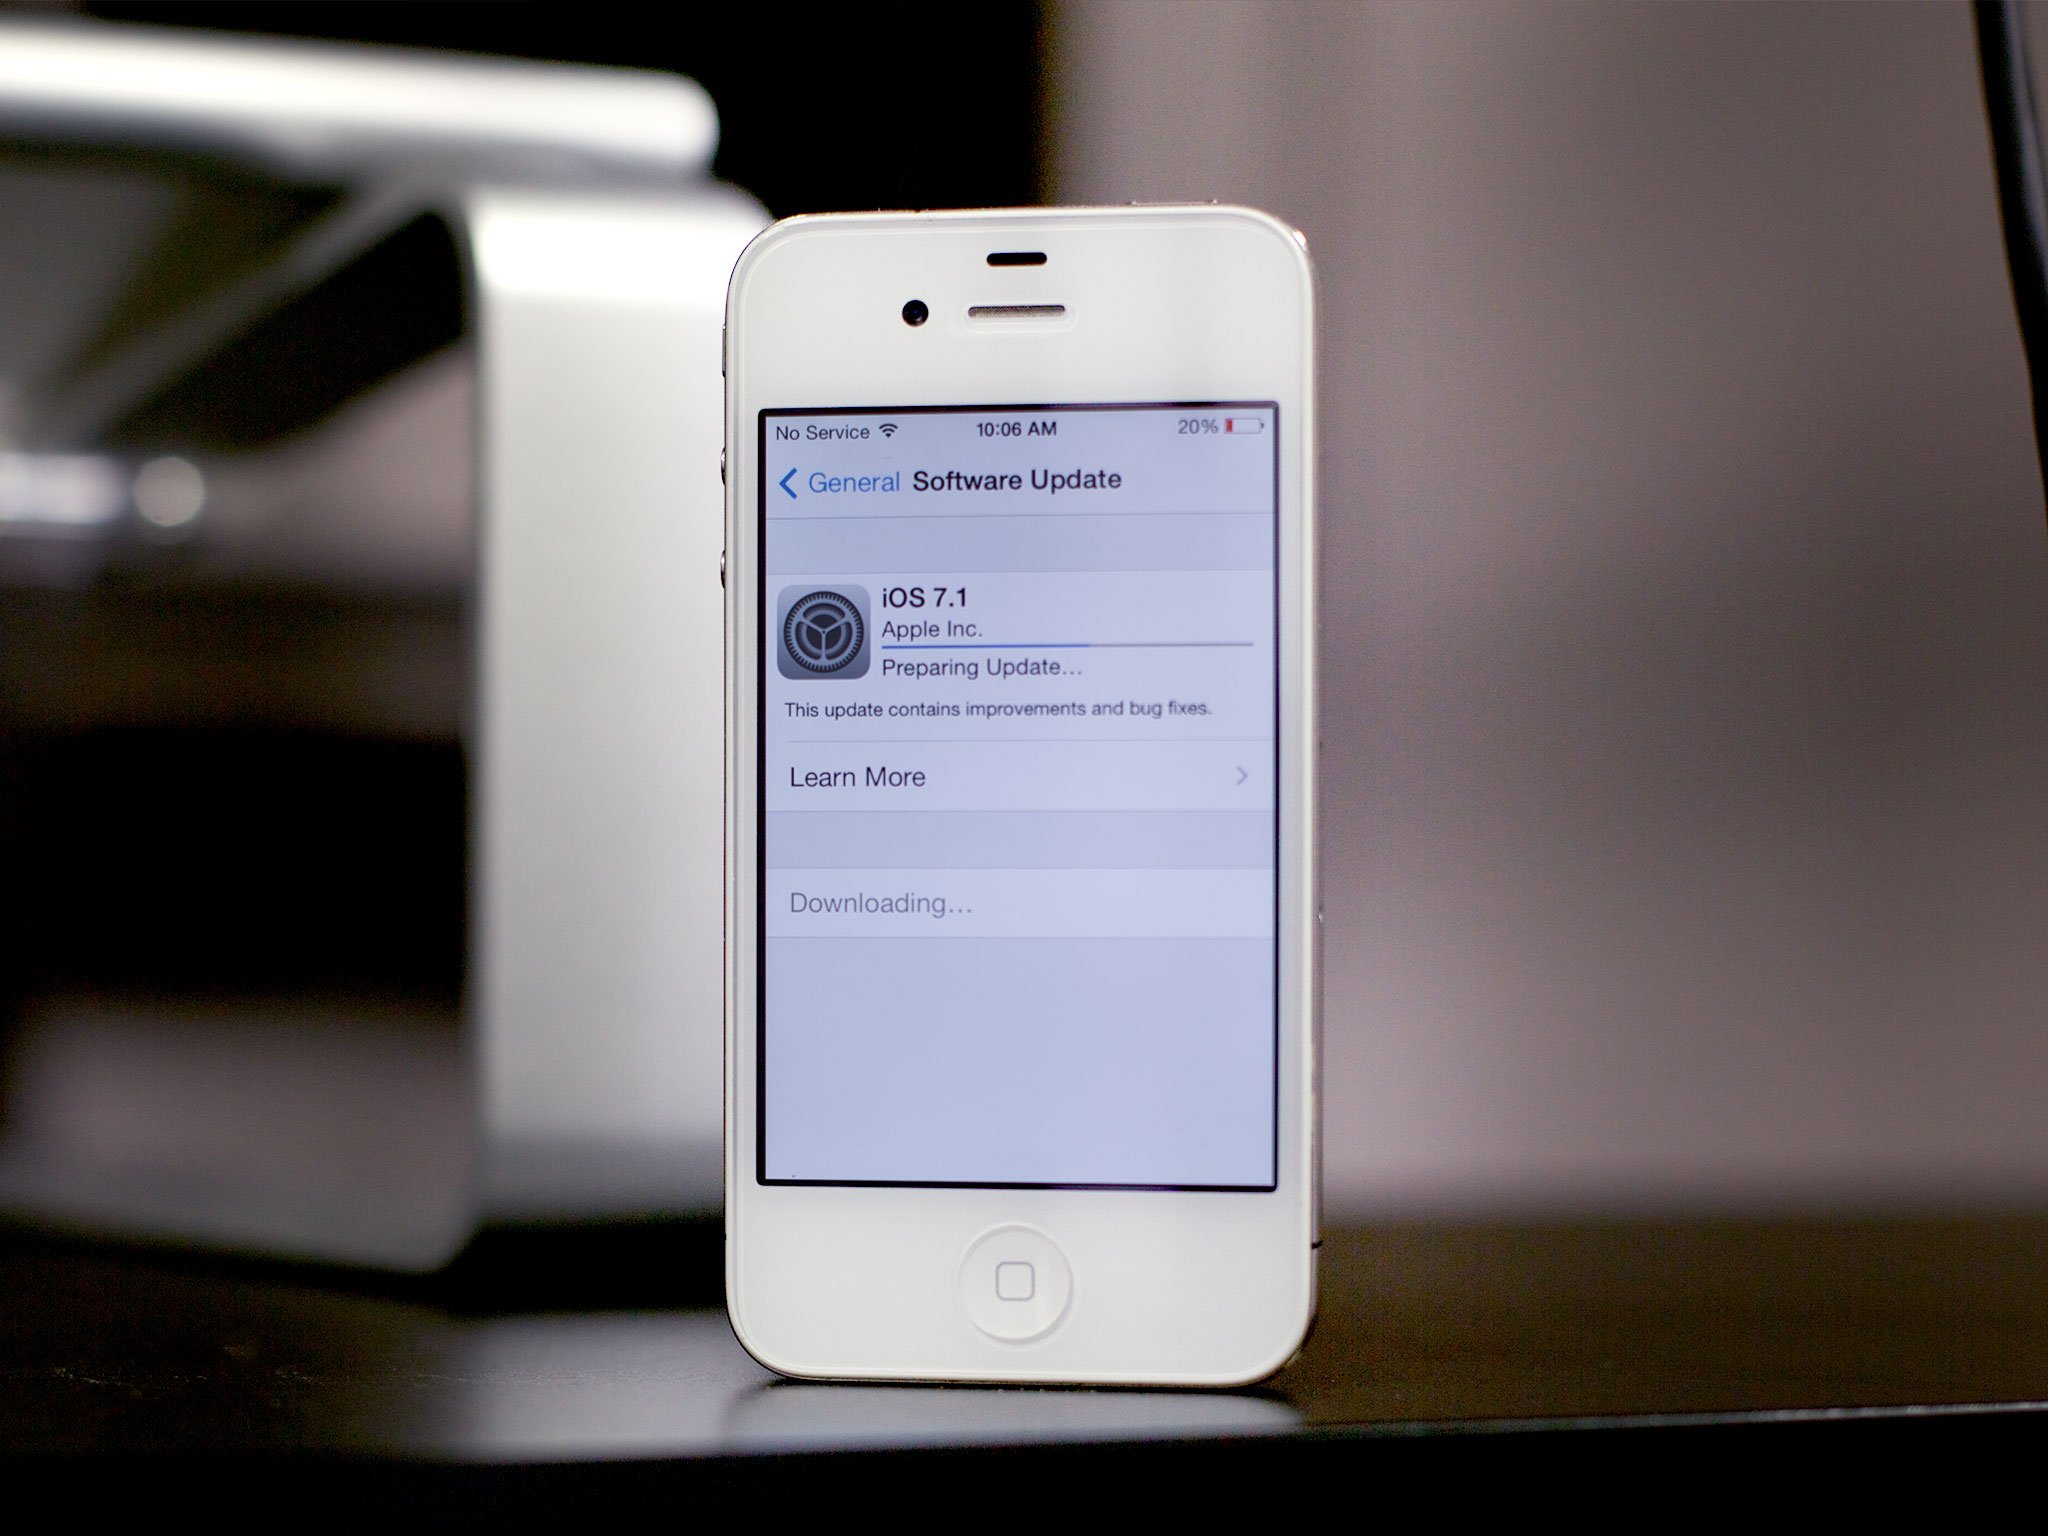 iPhone 4 owners: Has iOS 7.1 improved performance?